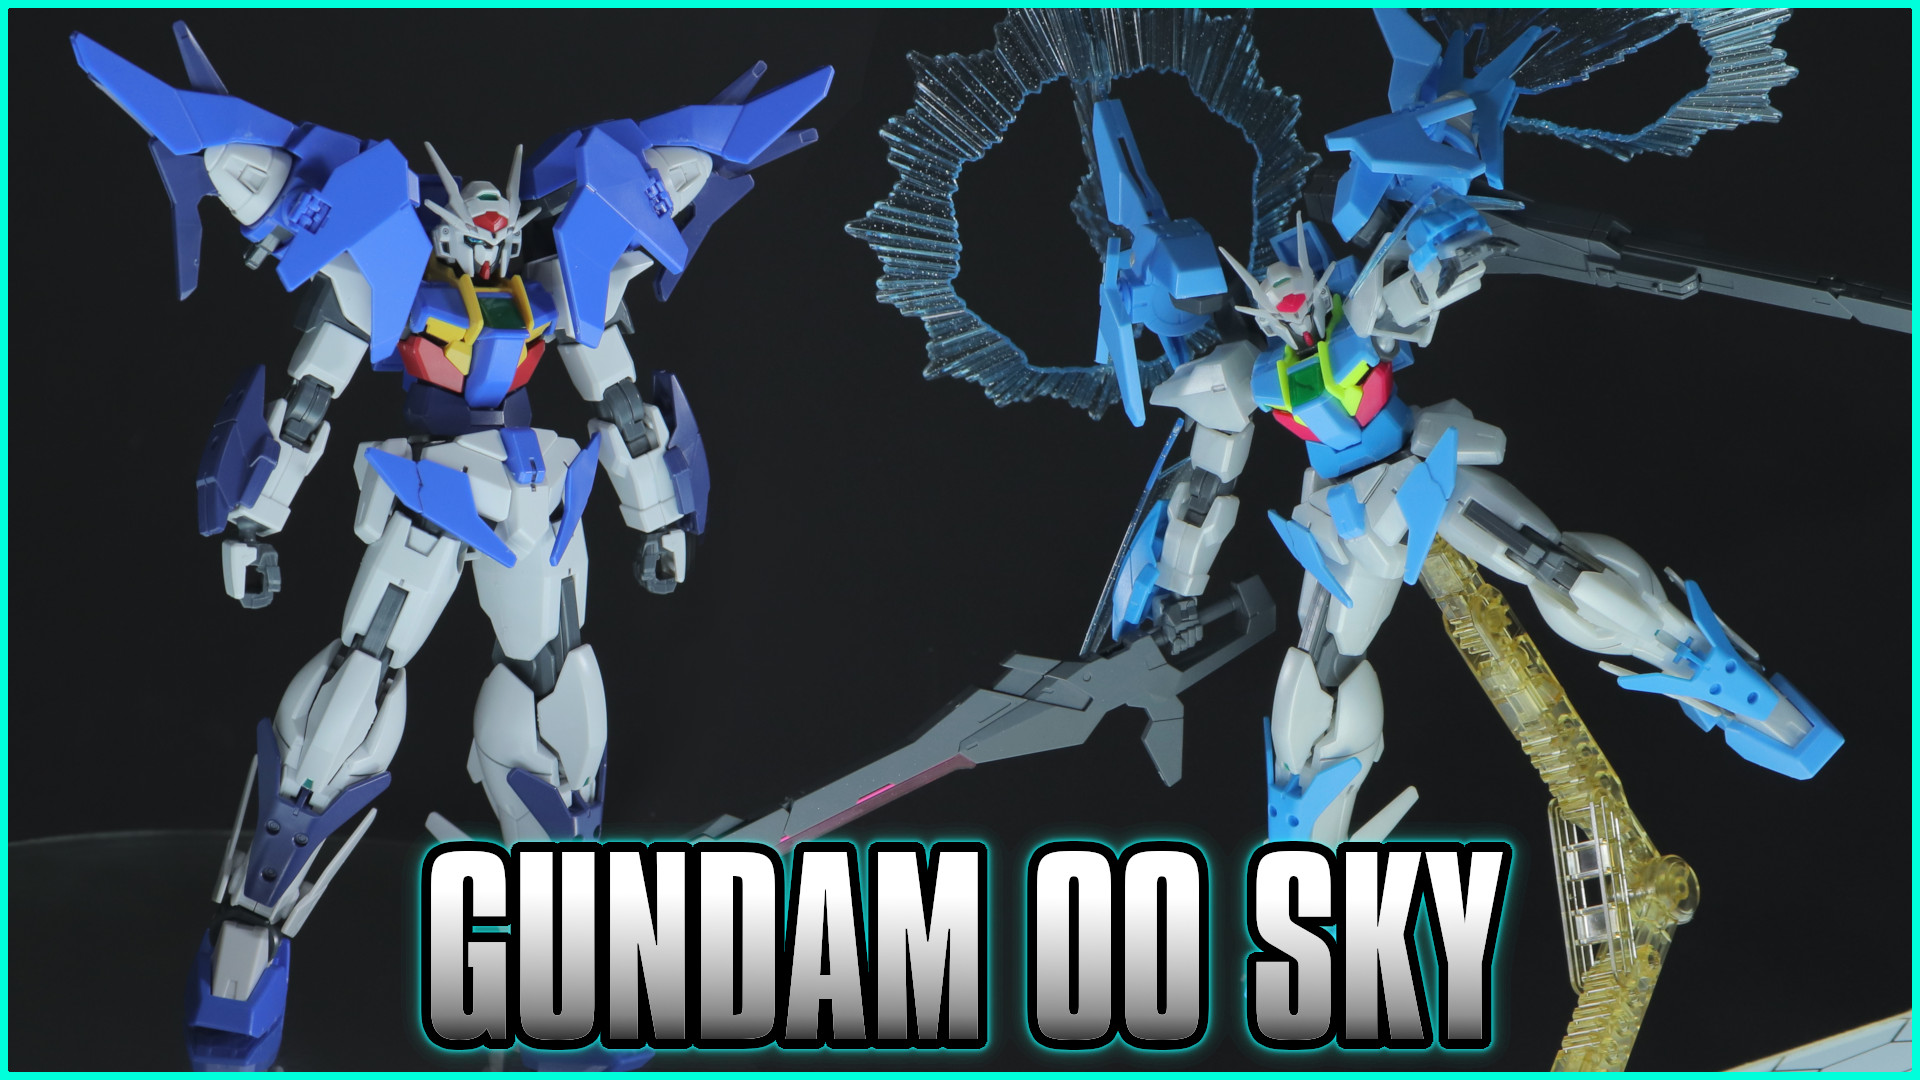 1//144 Scale Kit Bandai Gundam Build Divers 014-SP OO Sky Higher Than Skyphase